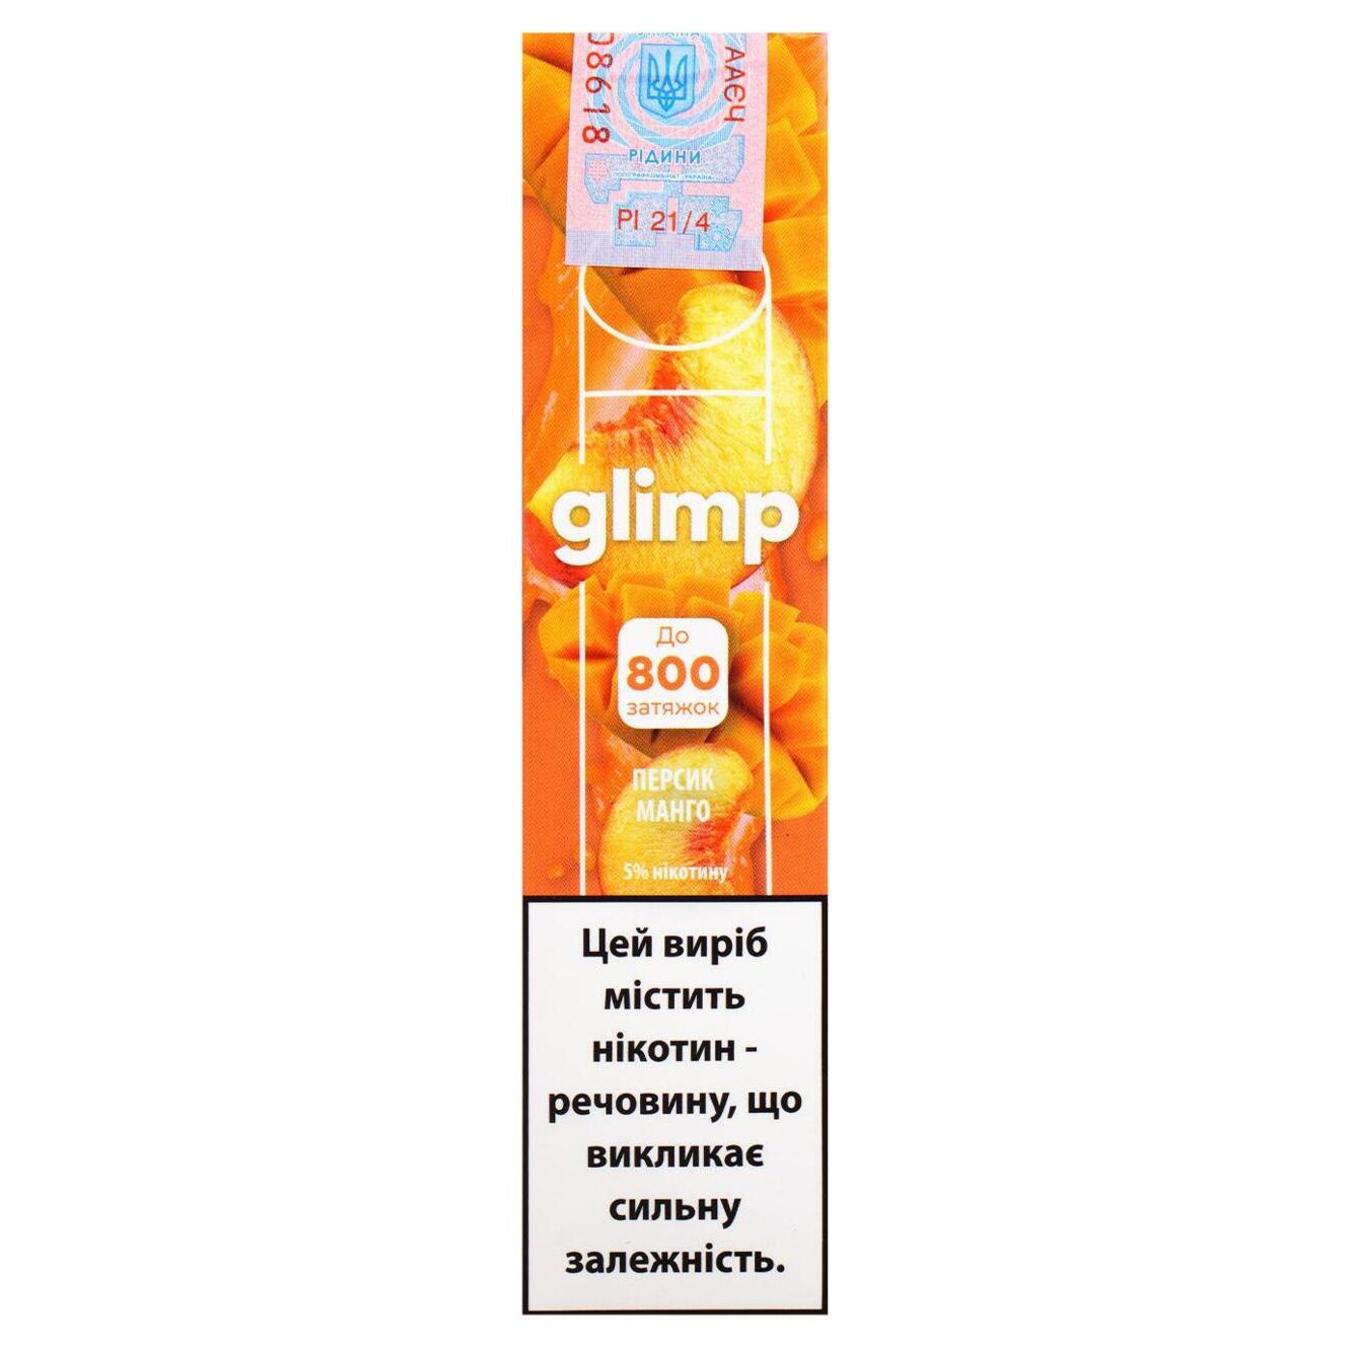 Vaporizer with Peach Mango flavor GLIMP 800 5% 2ml (the price is without excise tax)